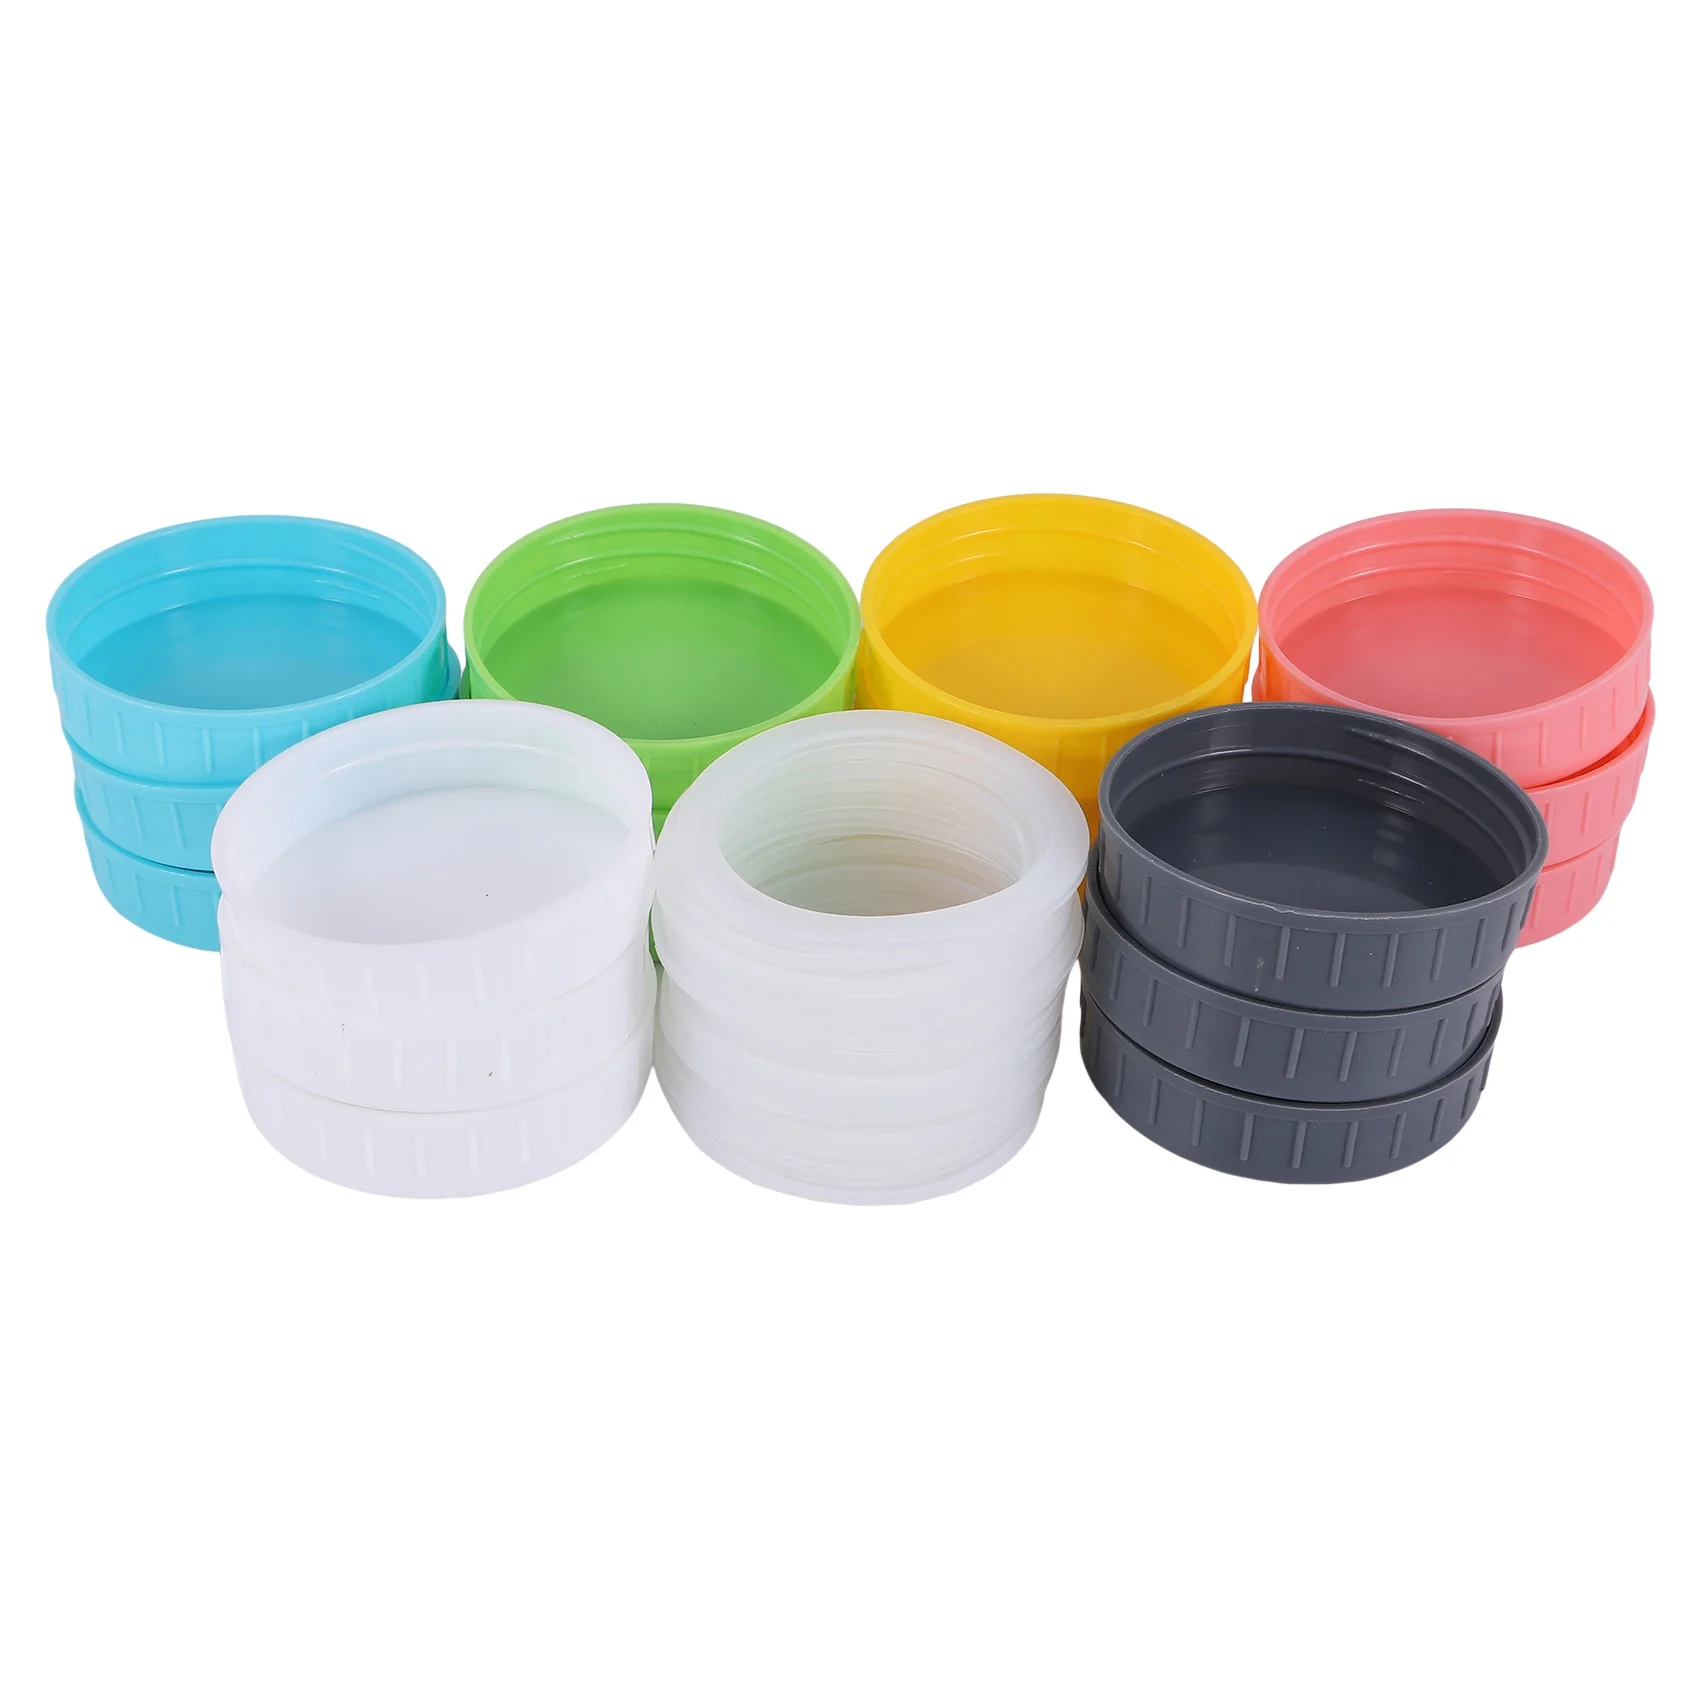 

18Pcs Plastic Regular Mouth Jar Lids for Ball, Kerr and More with Rings - Colored Plastic Storage Cap